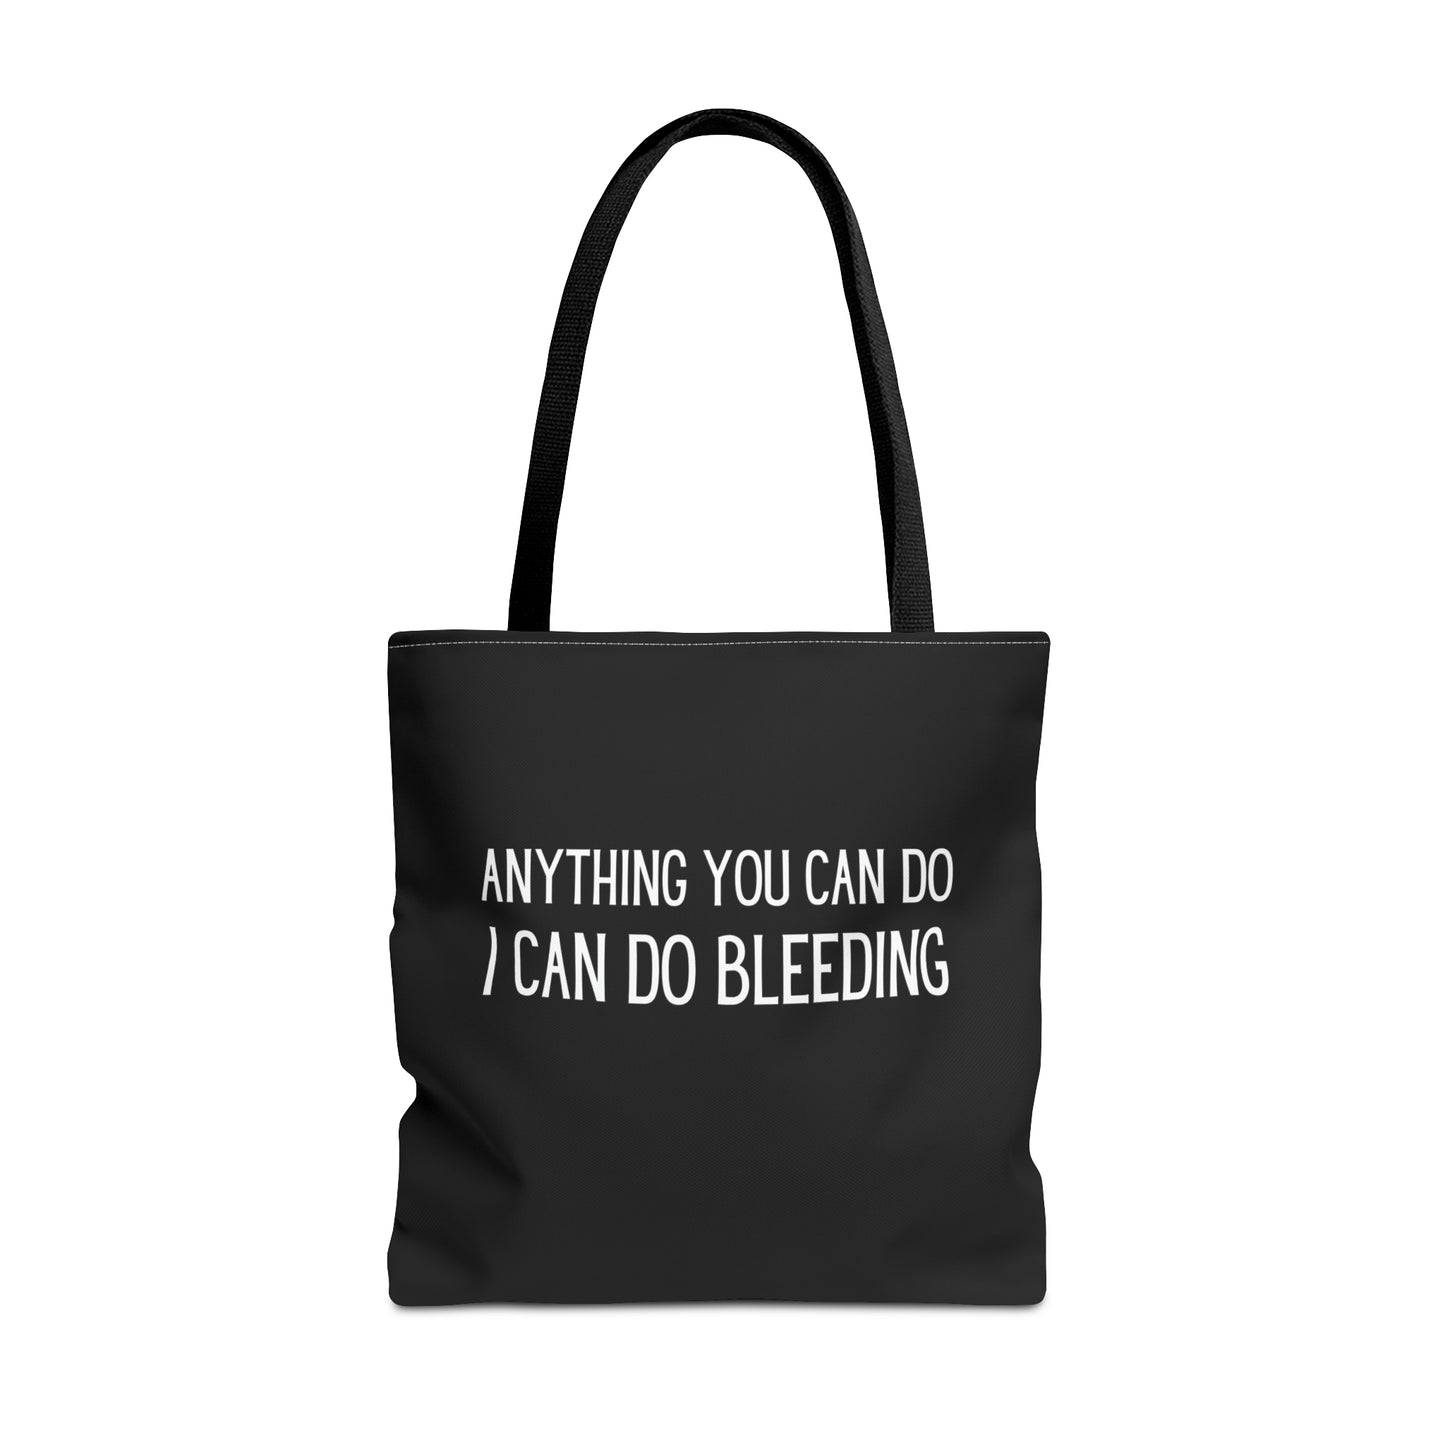 "Anything You Can Do I Can Do Bleeding" - Tote Bag